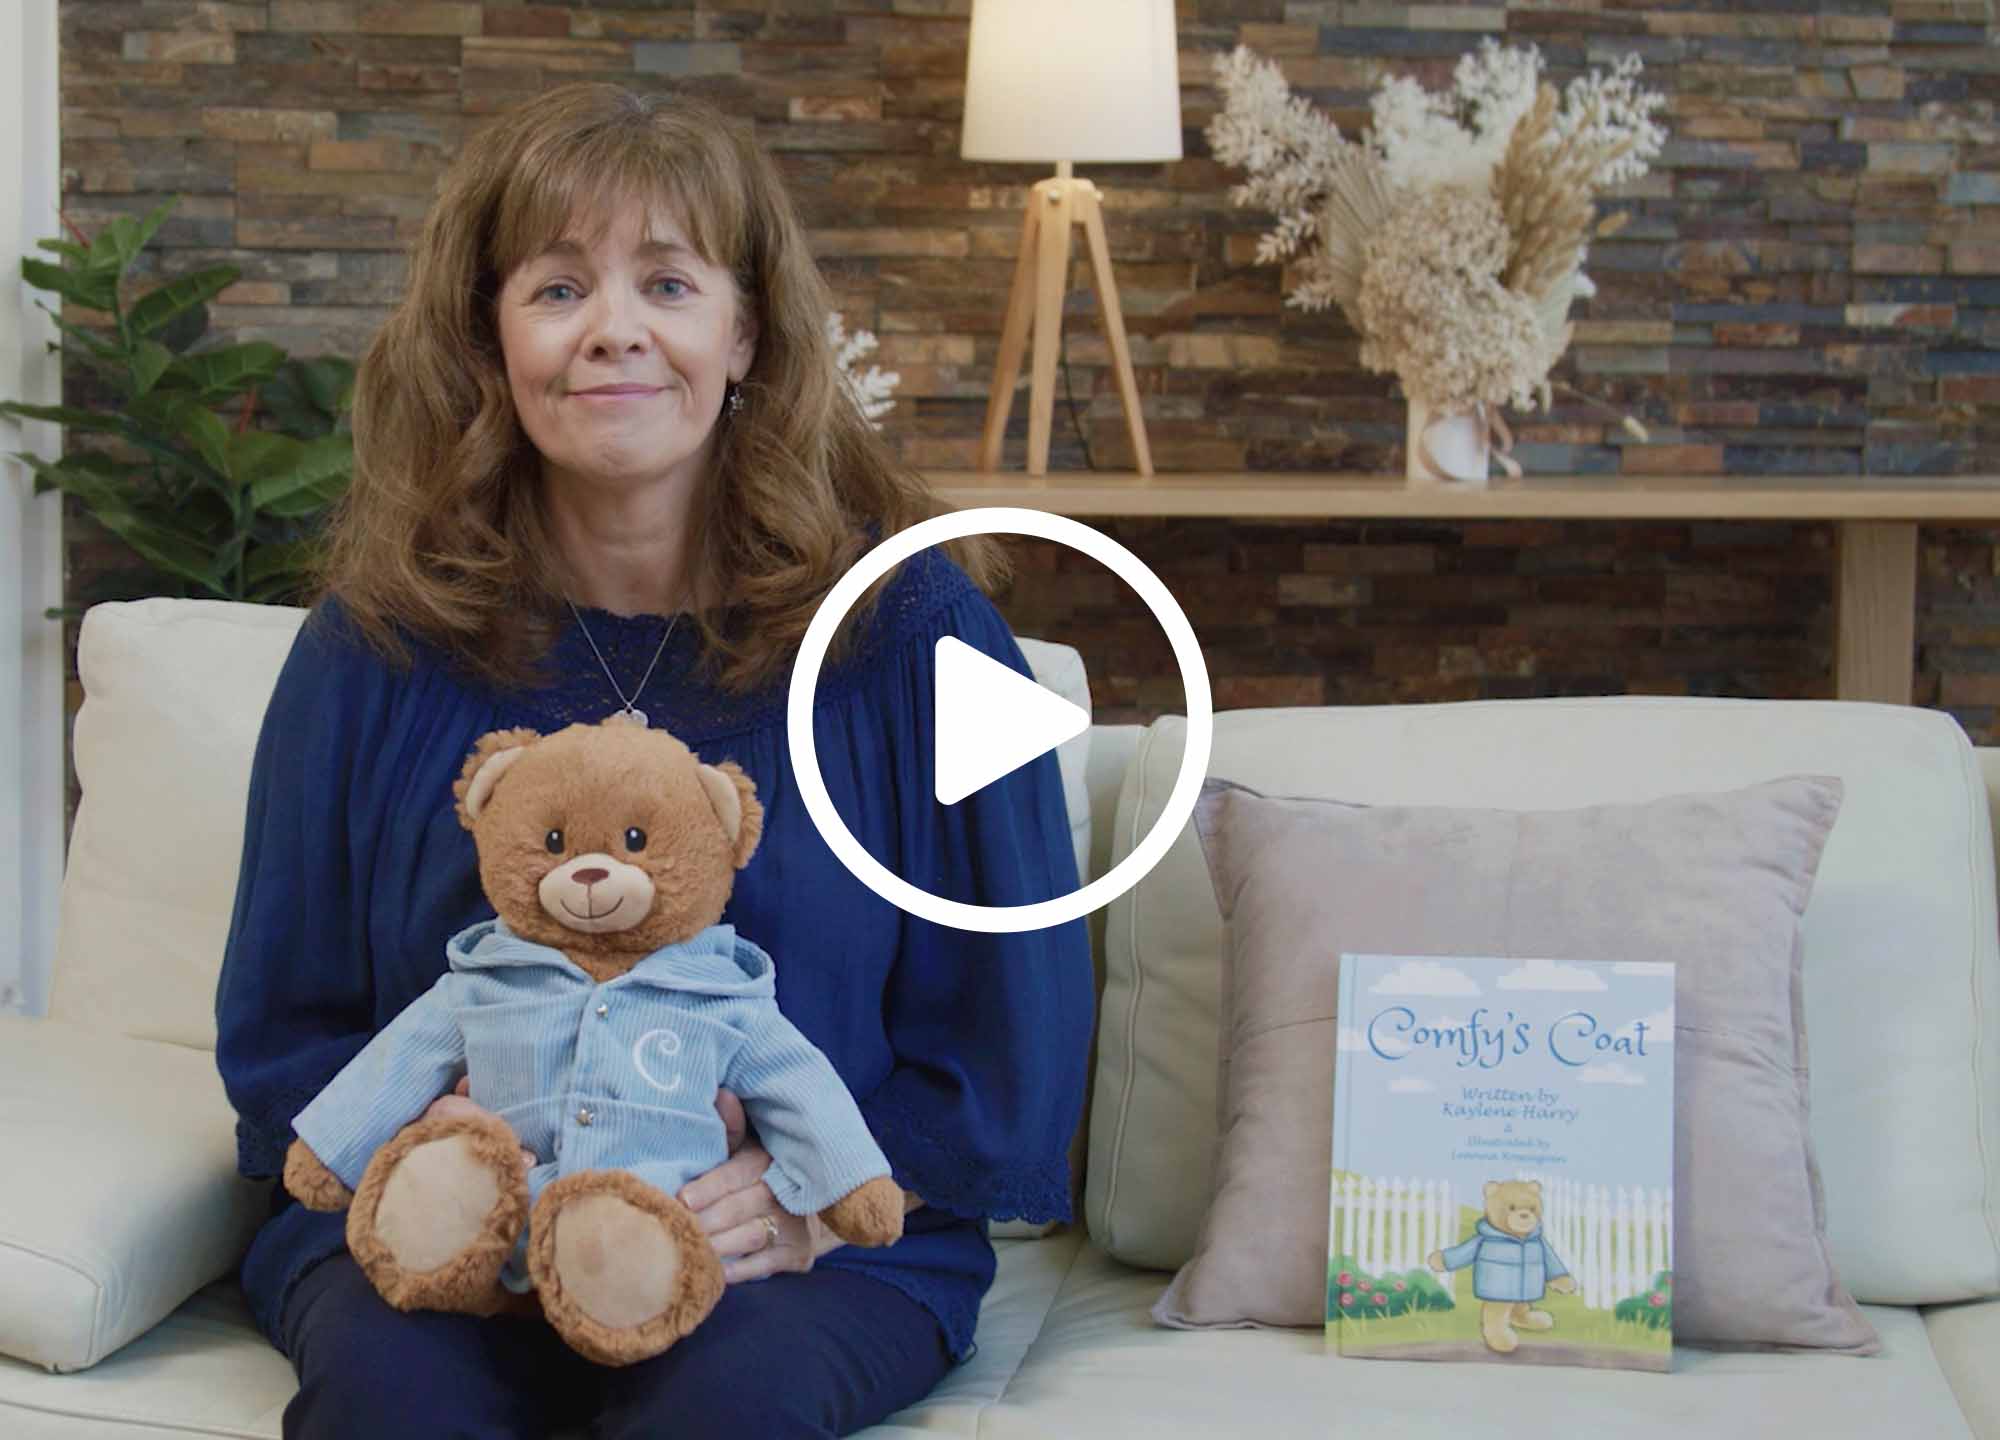 Comfy's Coat - the bear and the book - helping children manage